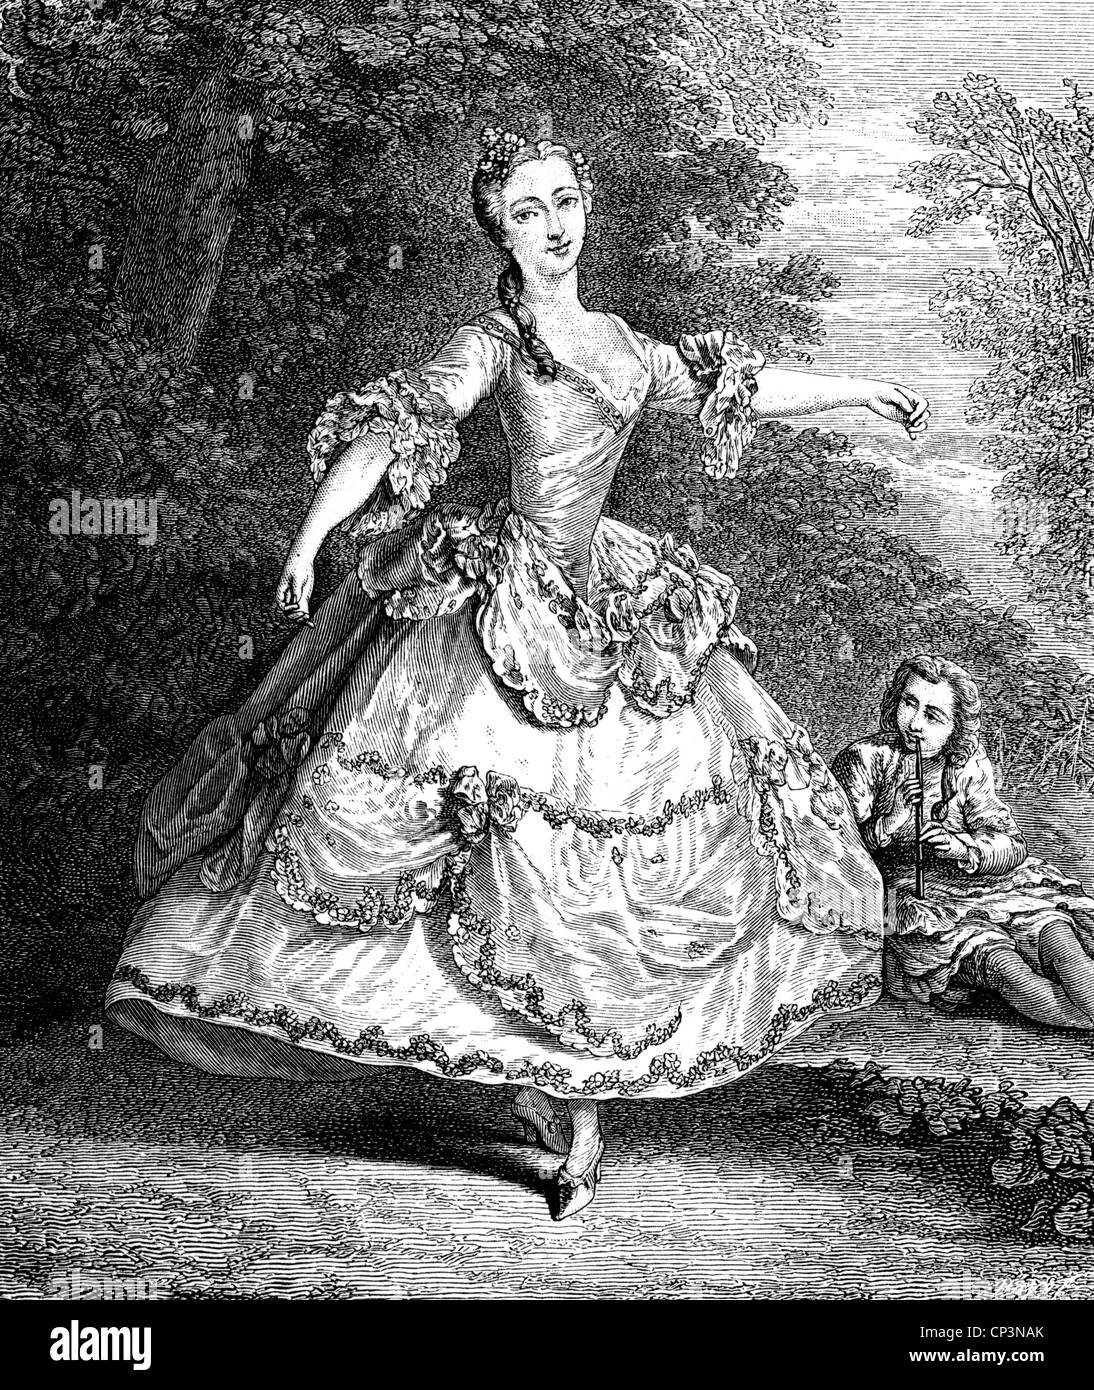 Salle, Marie, circa 1707 - 27.7.1756, French dancer, full length, dance, wood engraving, 19th century, after painting by Nicolas Lancret, Stock Photo